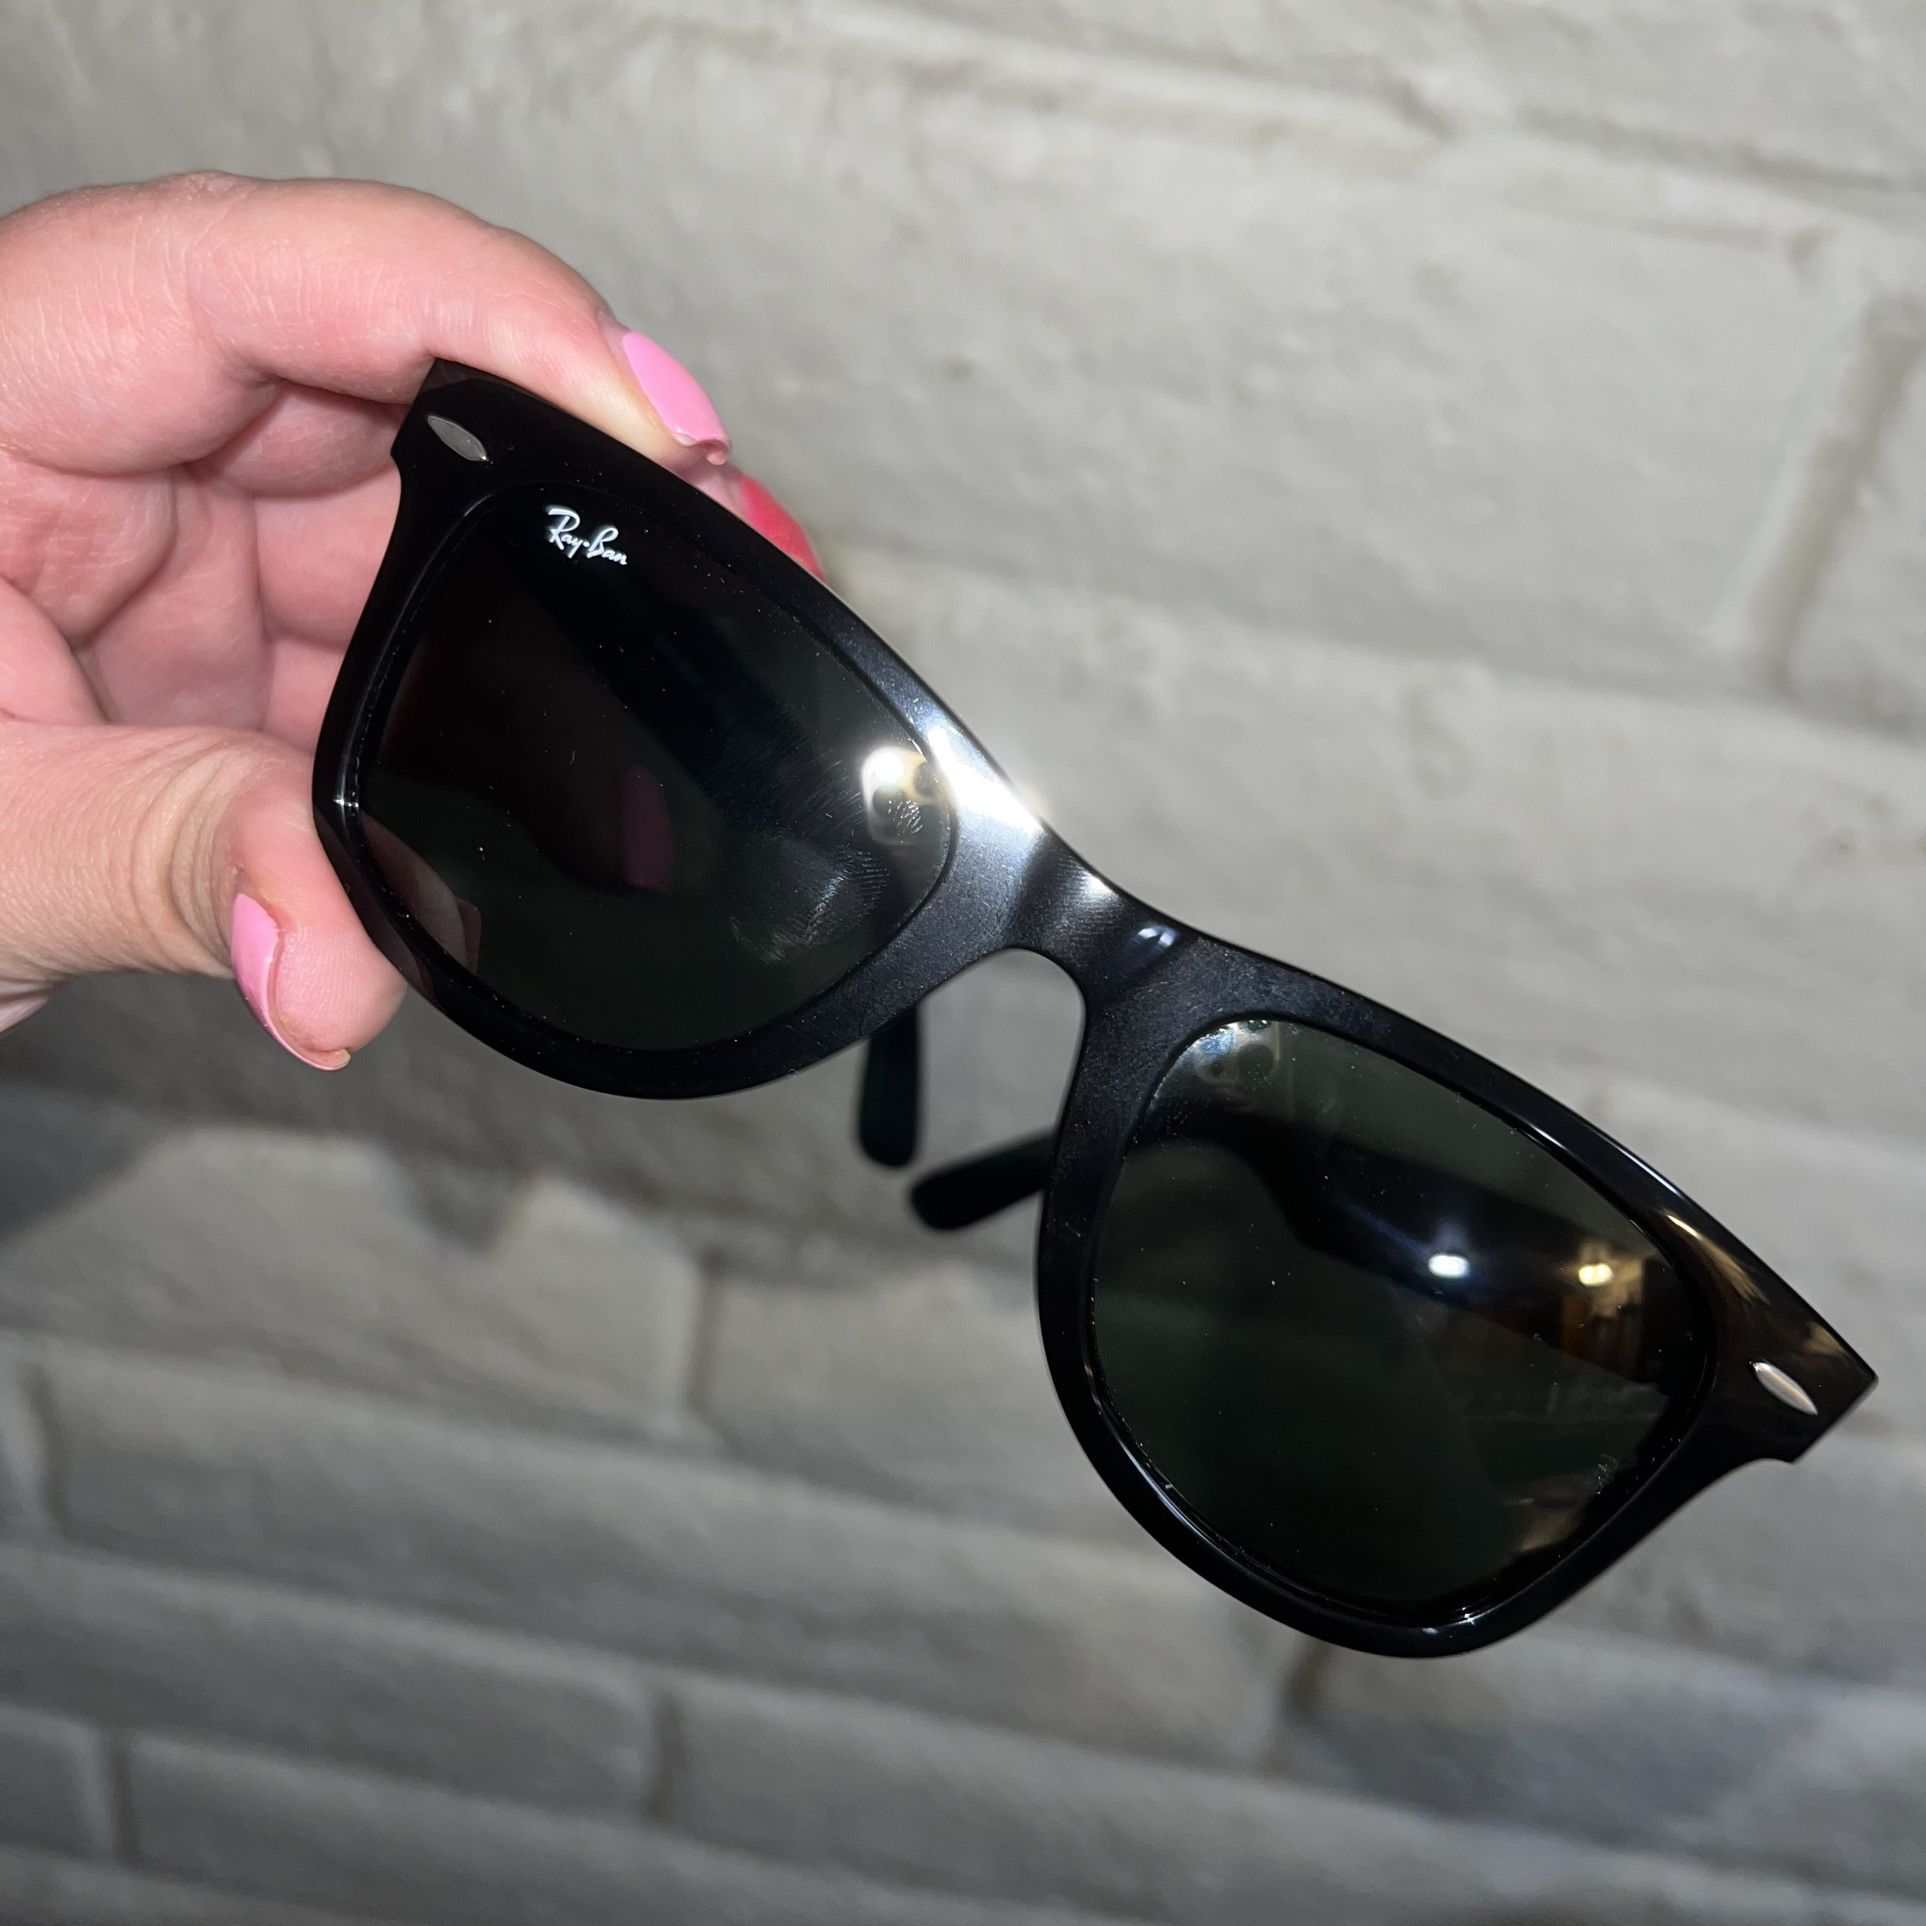 Ray-Ban Sunglasses for Sale in Tucson, AZ - OfferUp